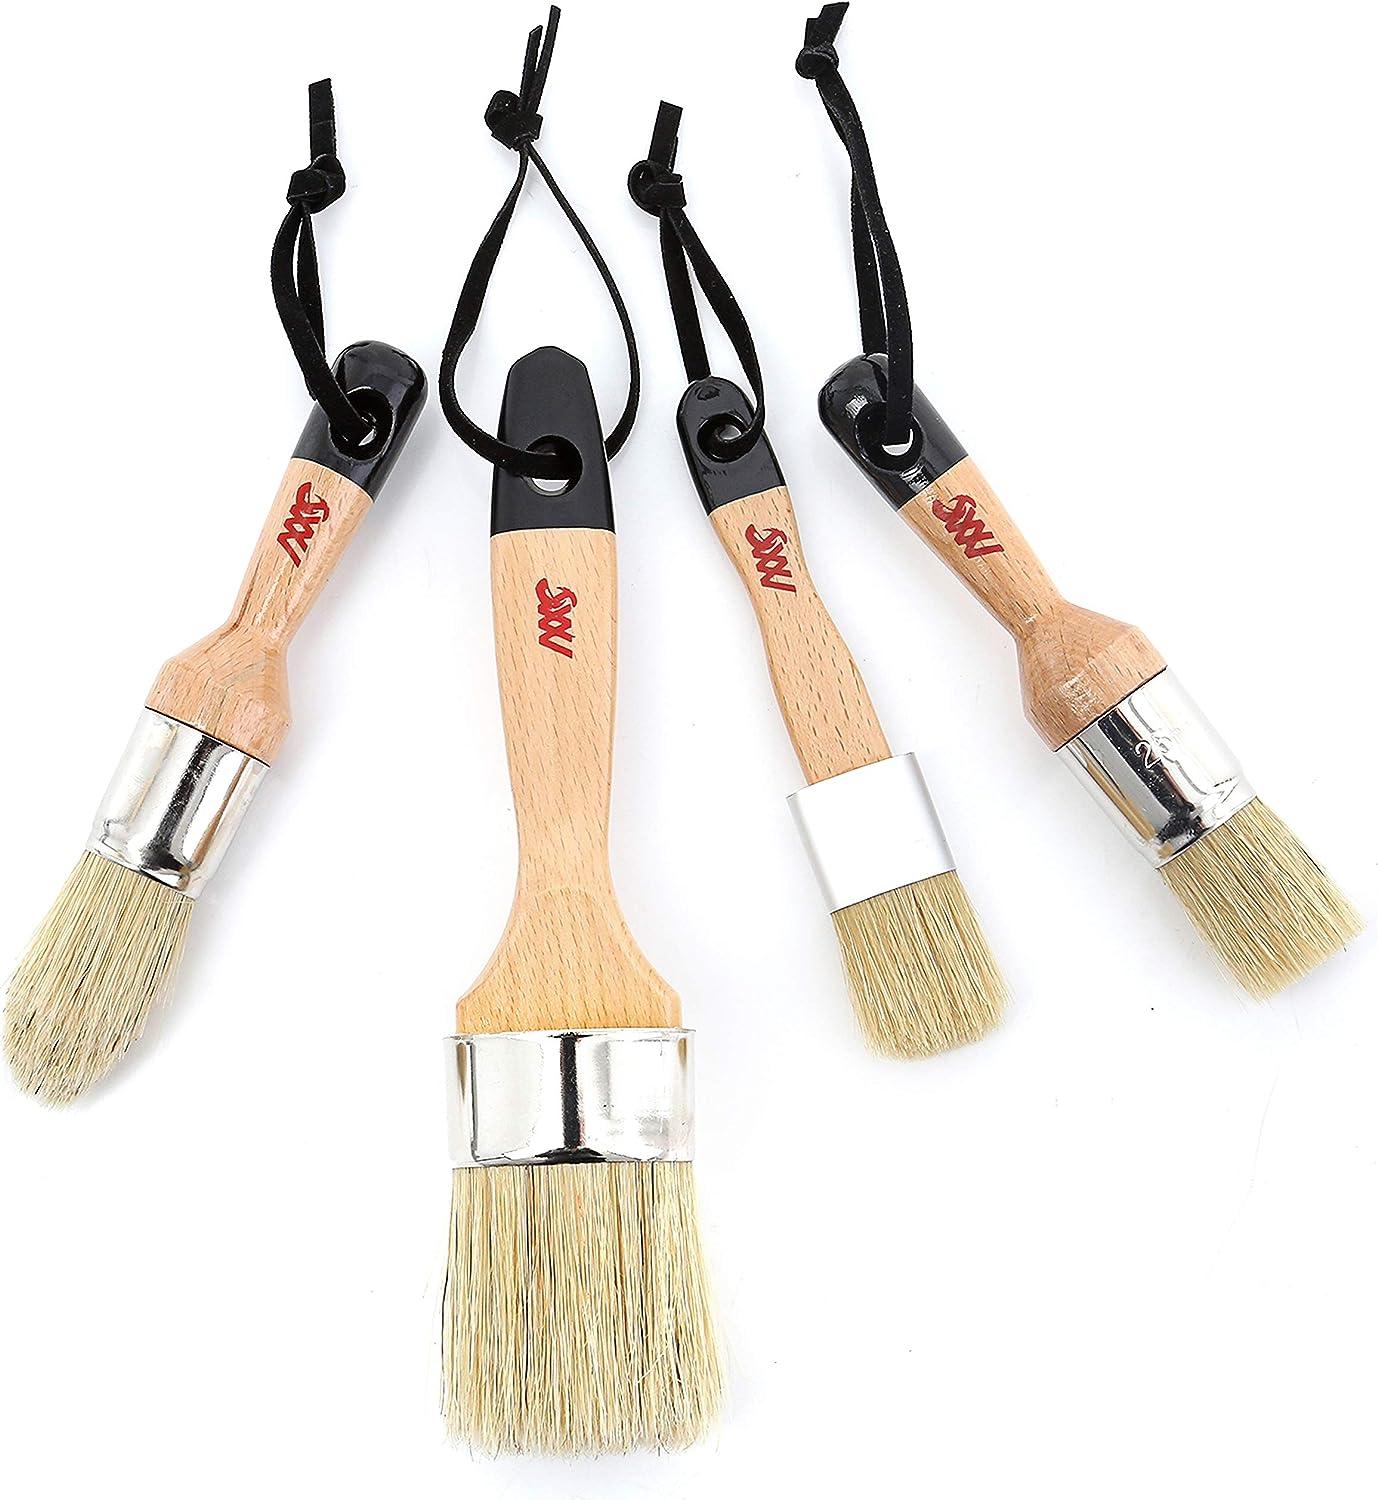 Chalk Wax Paint Brush 5PCs set including 3 small paint brushes for  furniture painting and 2 large chalk brushes, bristle paint brushes set  compatible